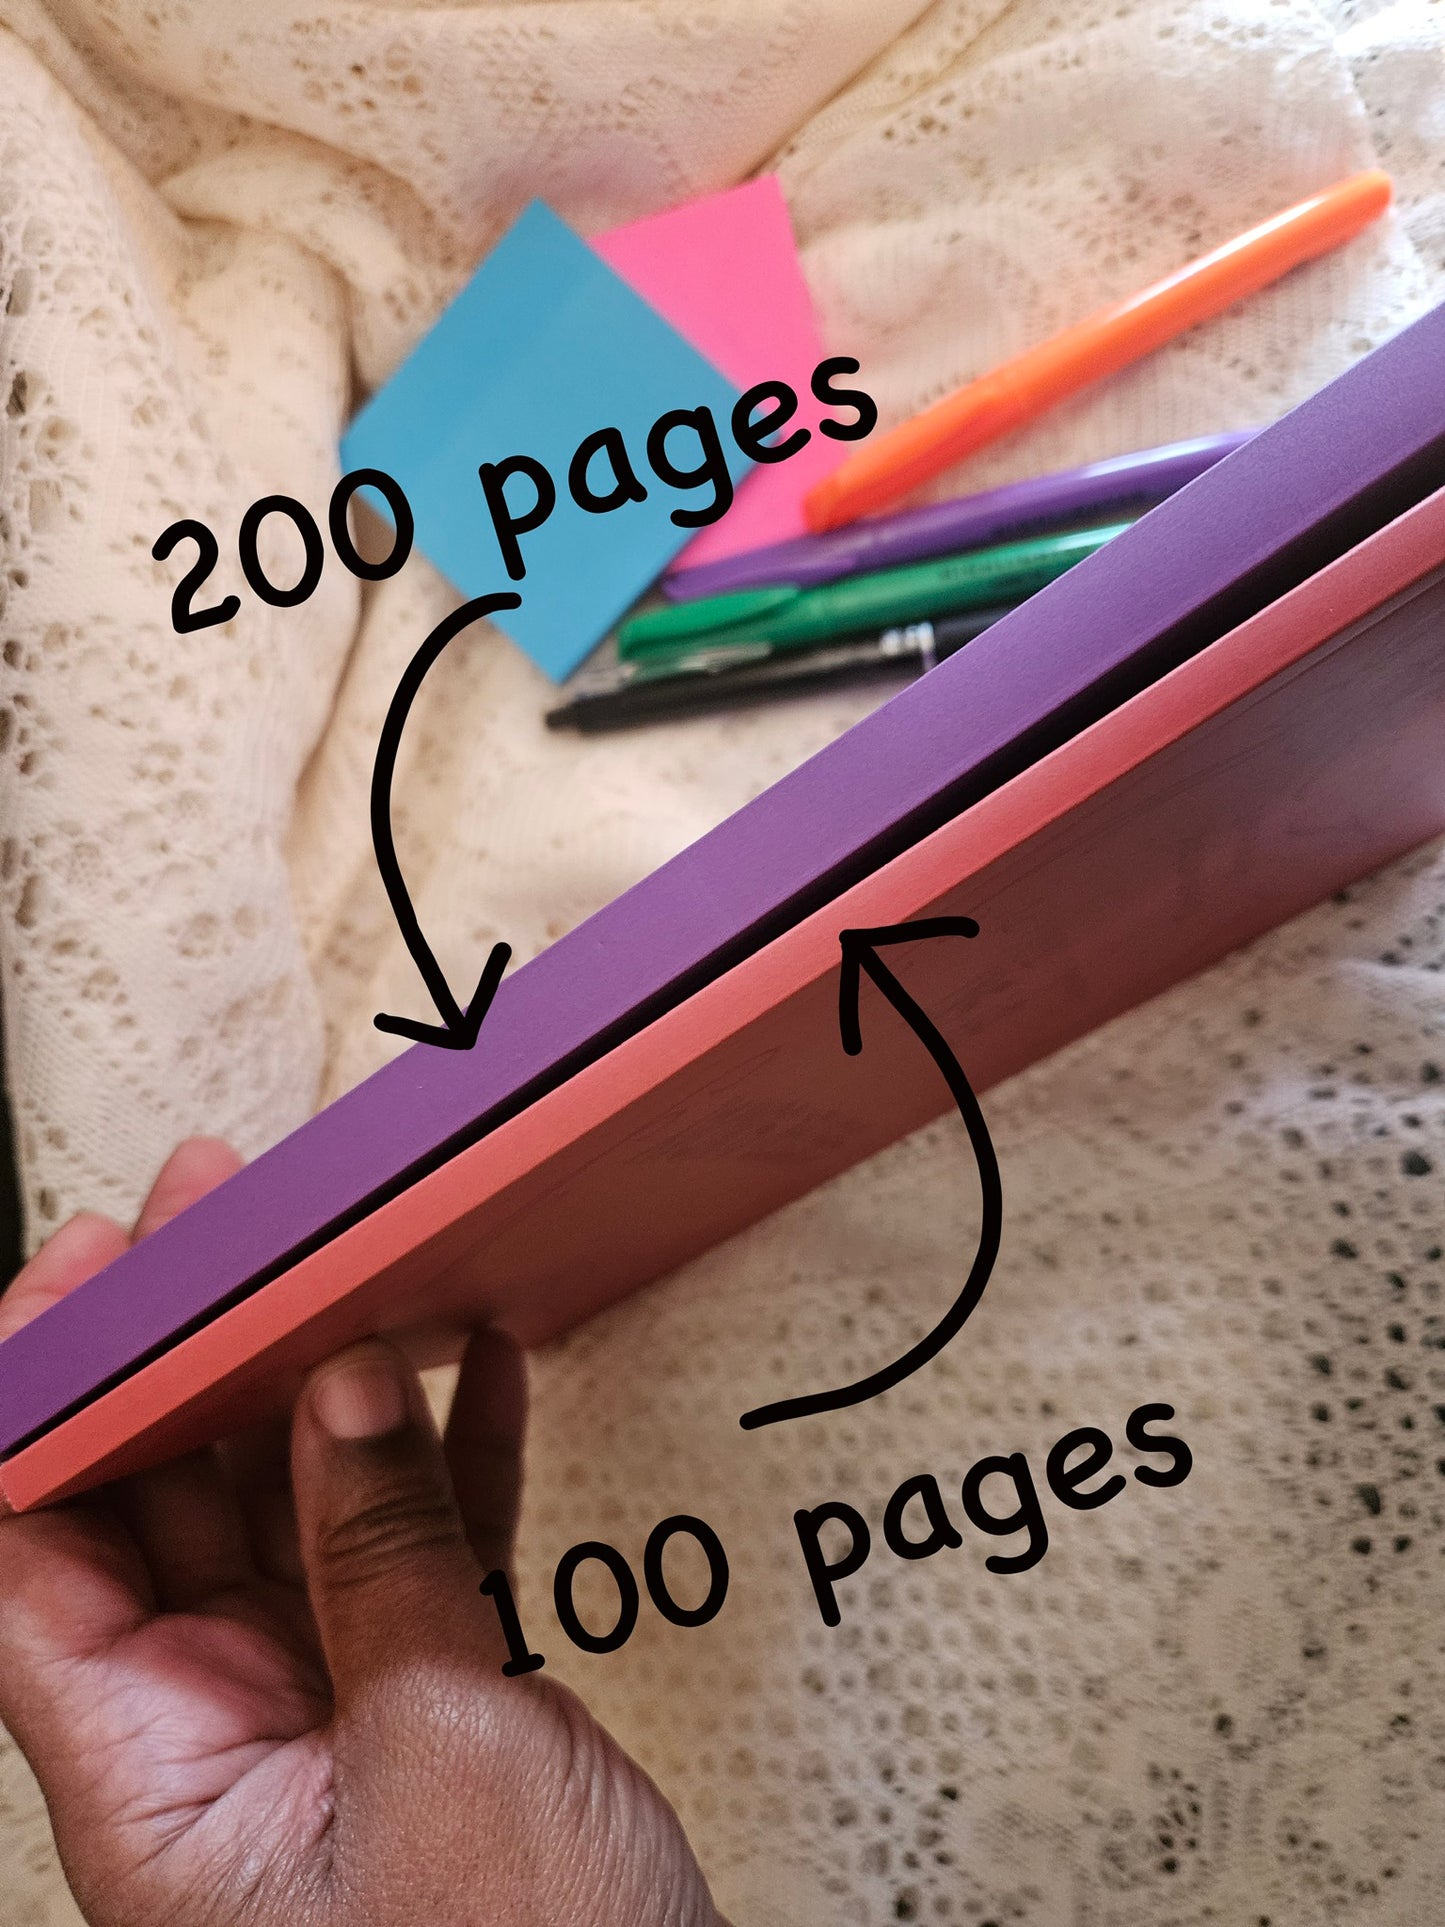 Thickness depending on how many pages you choose